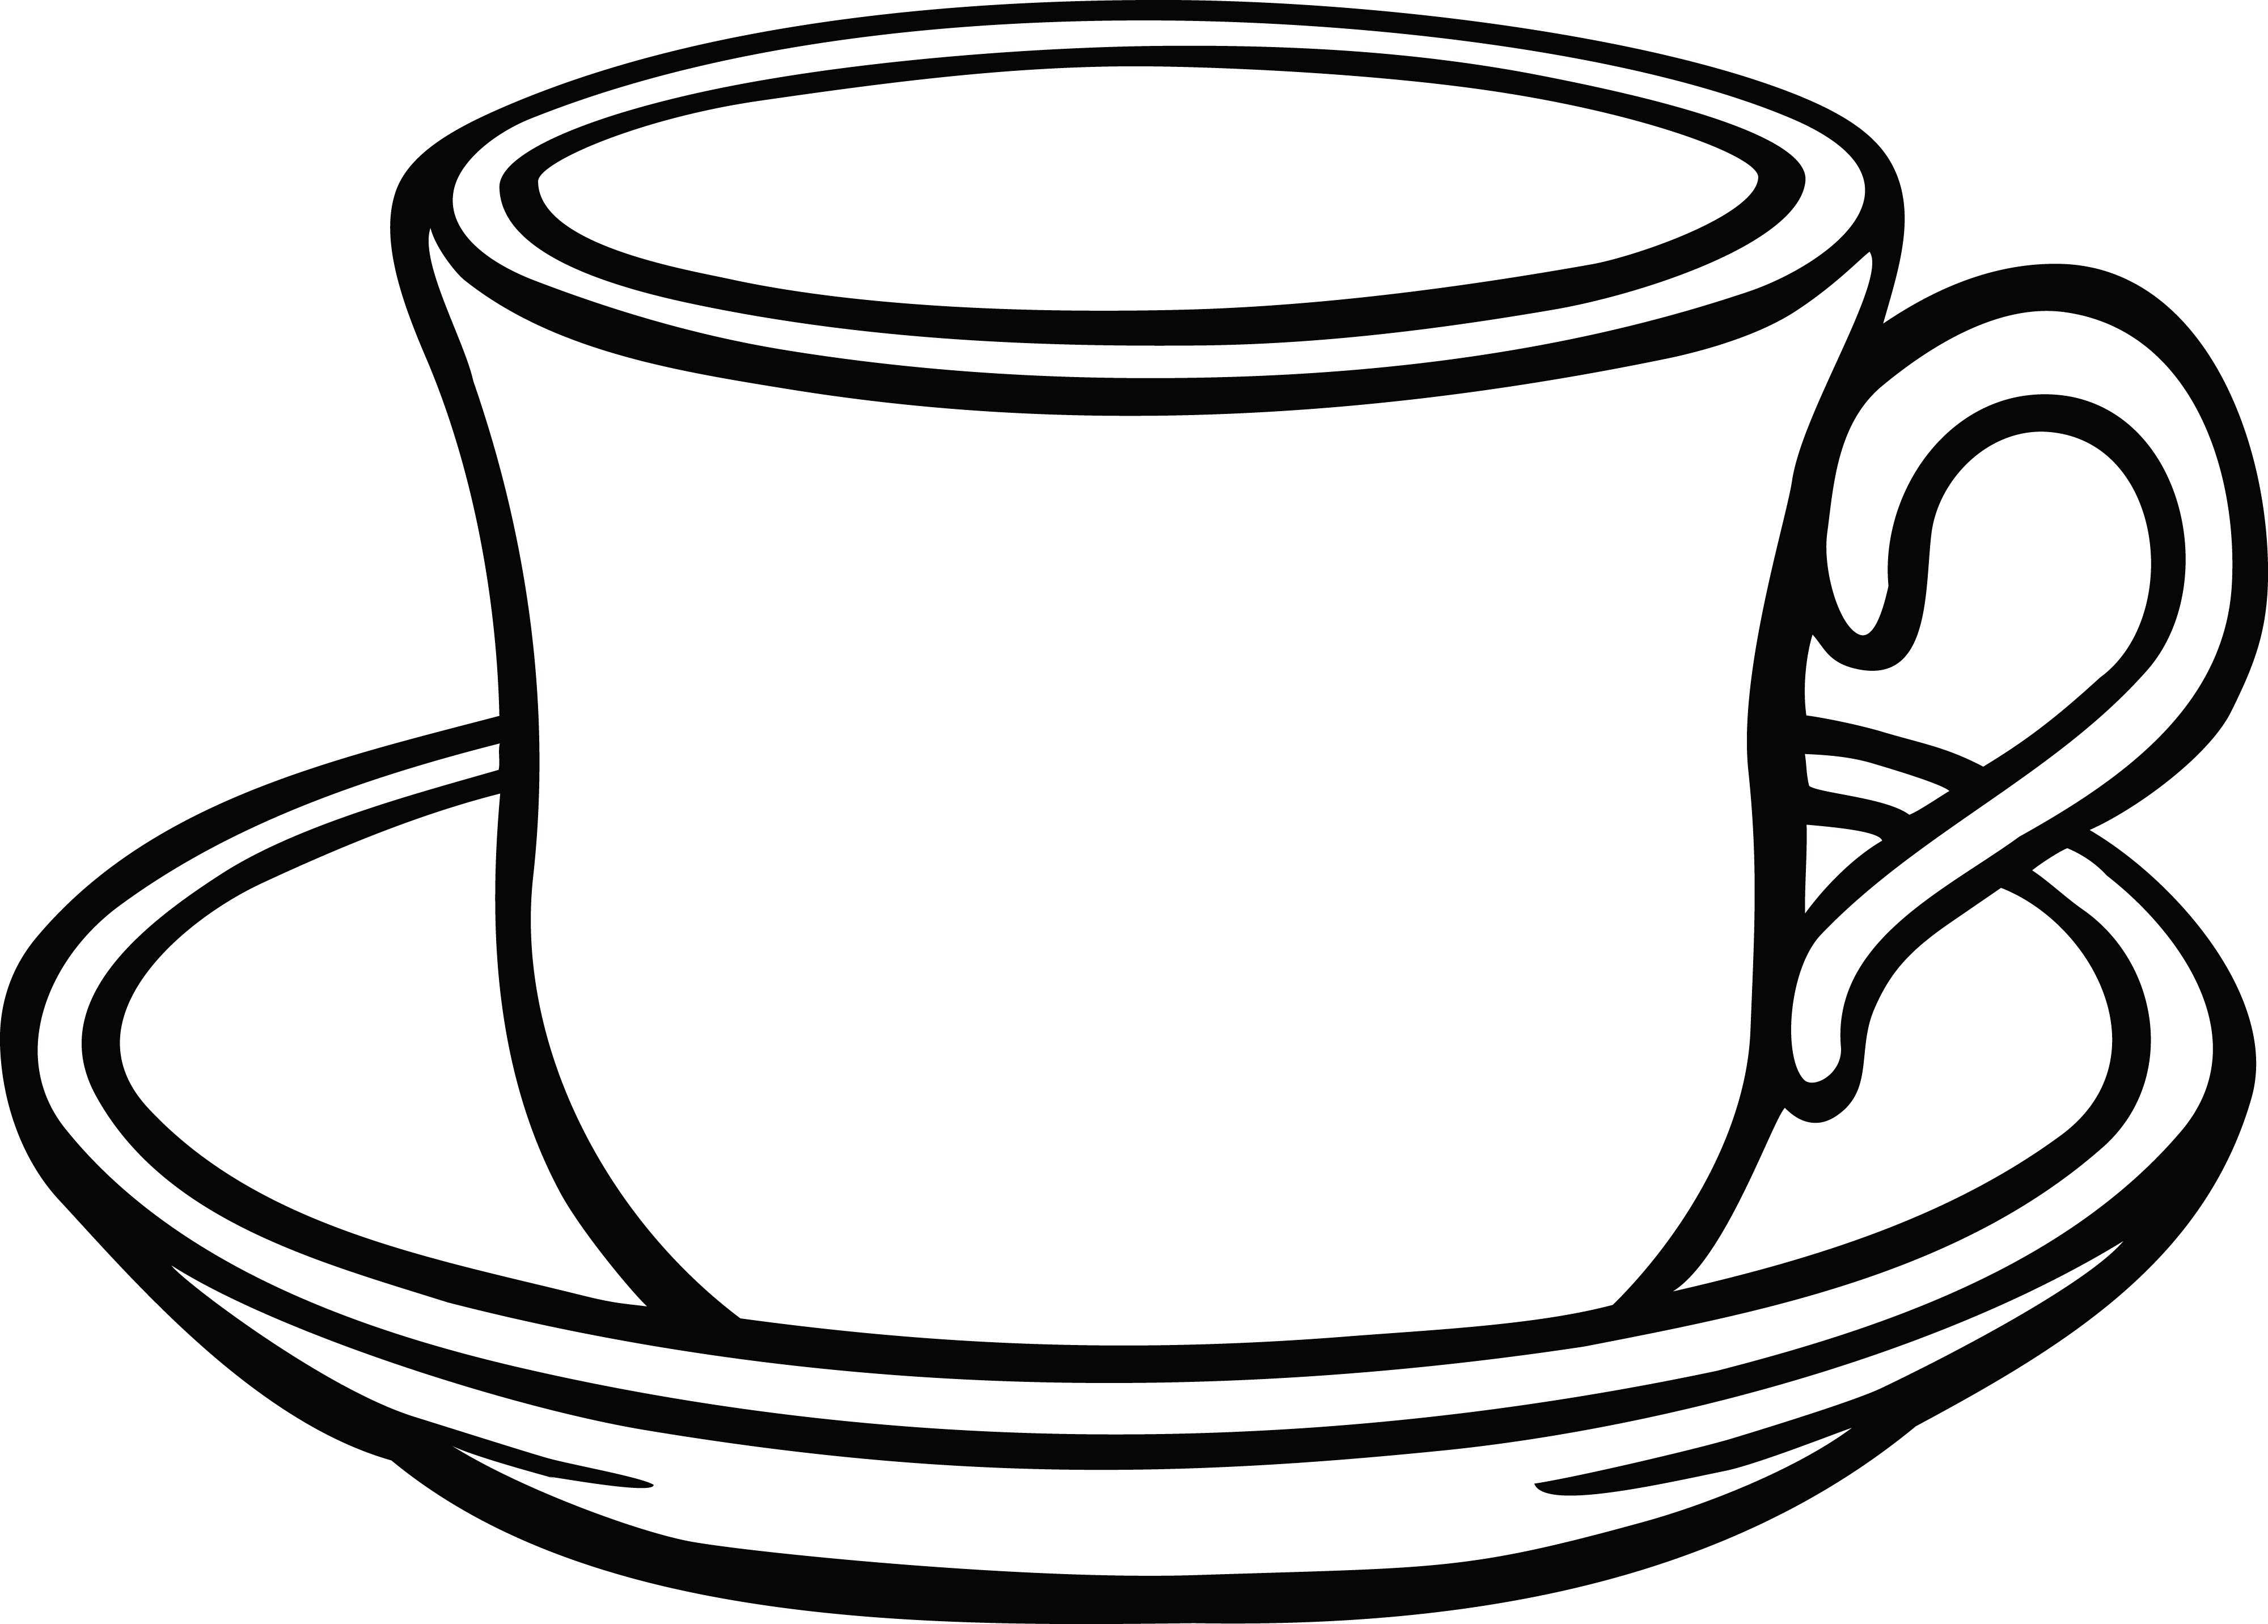 cup-and-saucer-drawing-free-download-on-clipartmag